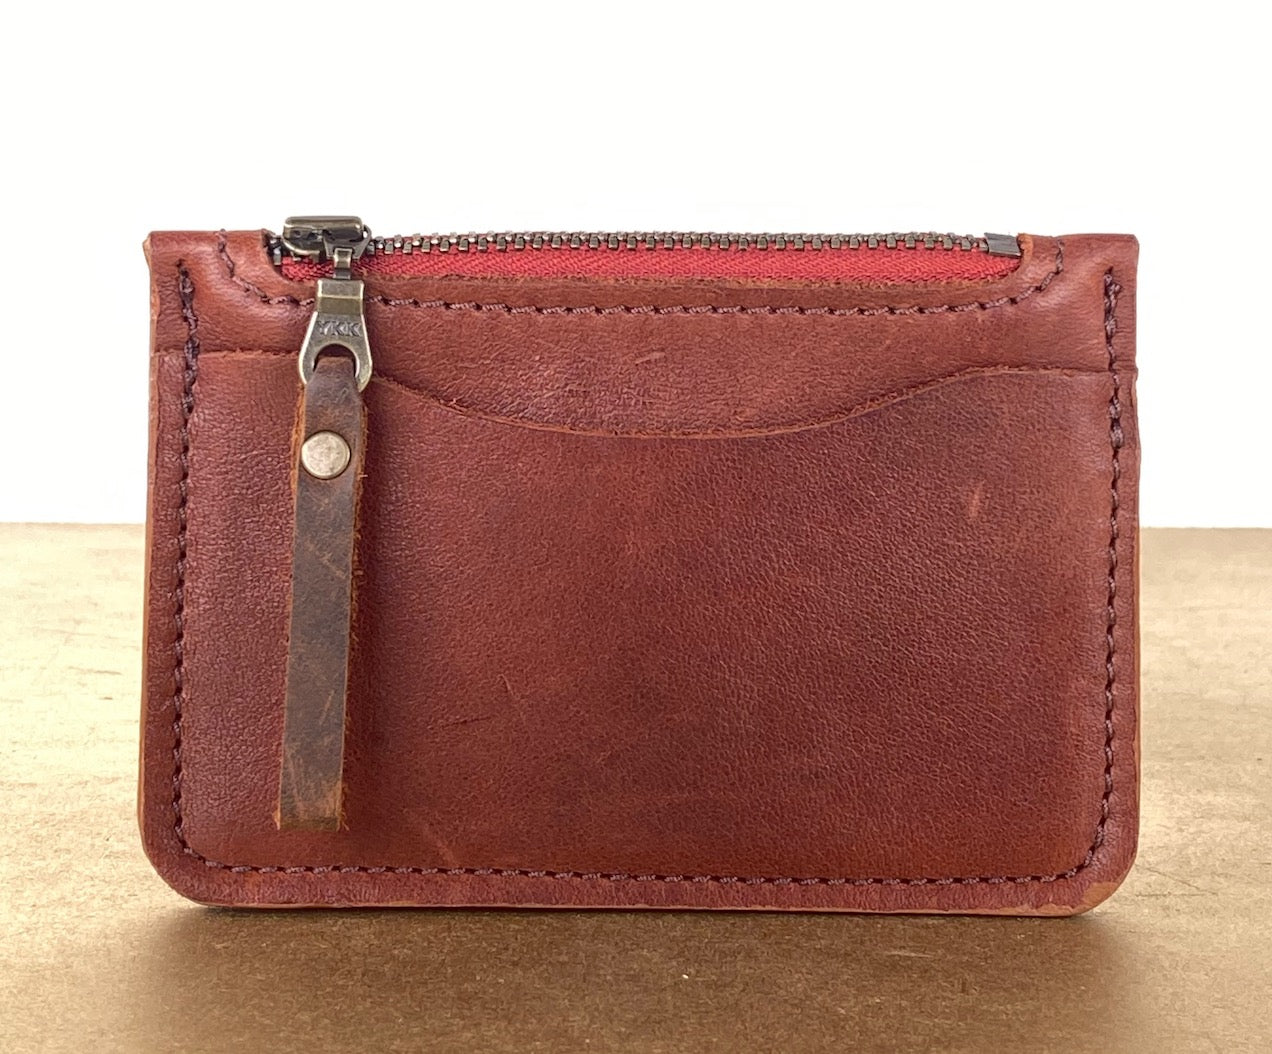 Card & Coin Wallet in Mahogany Brown Leather